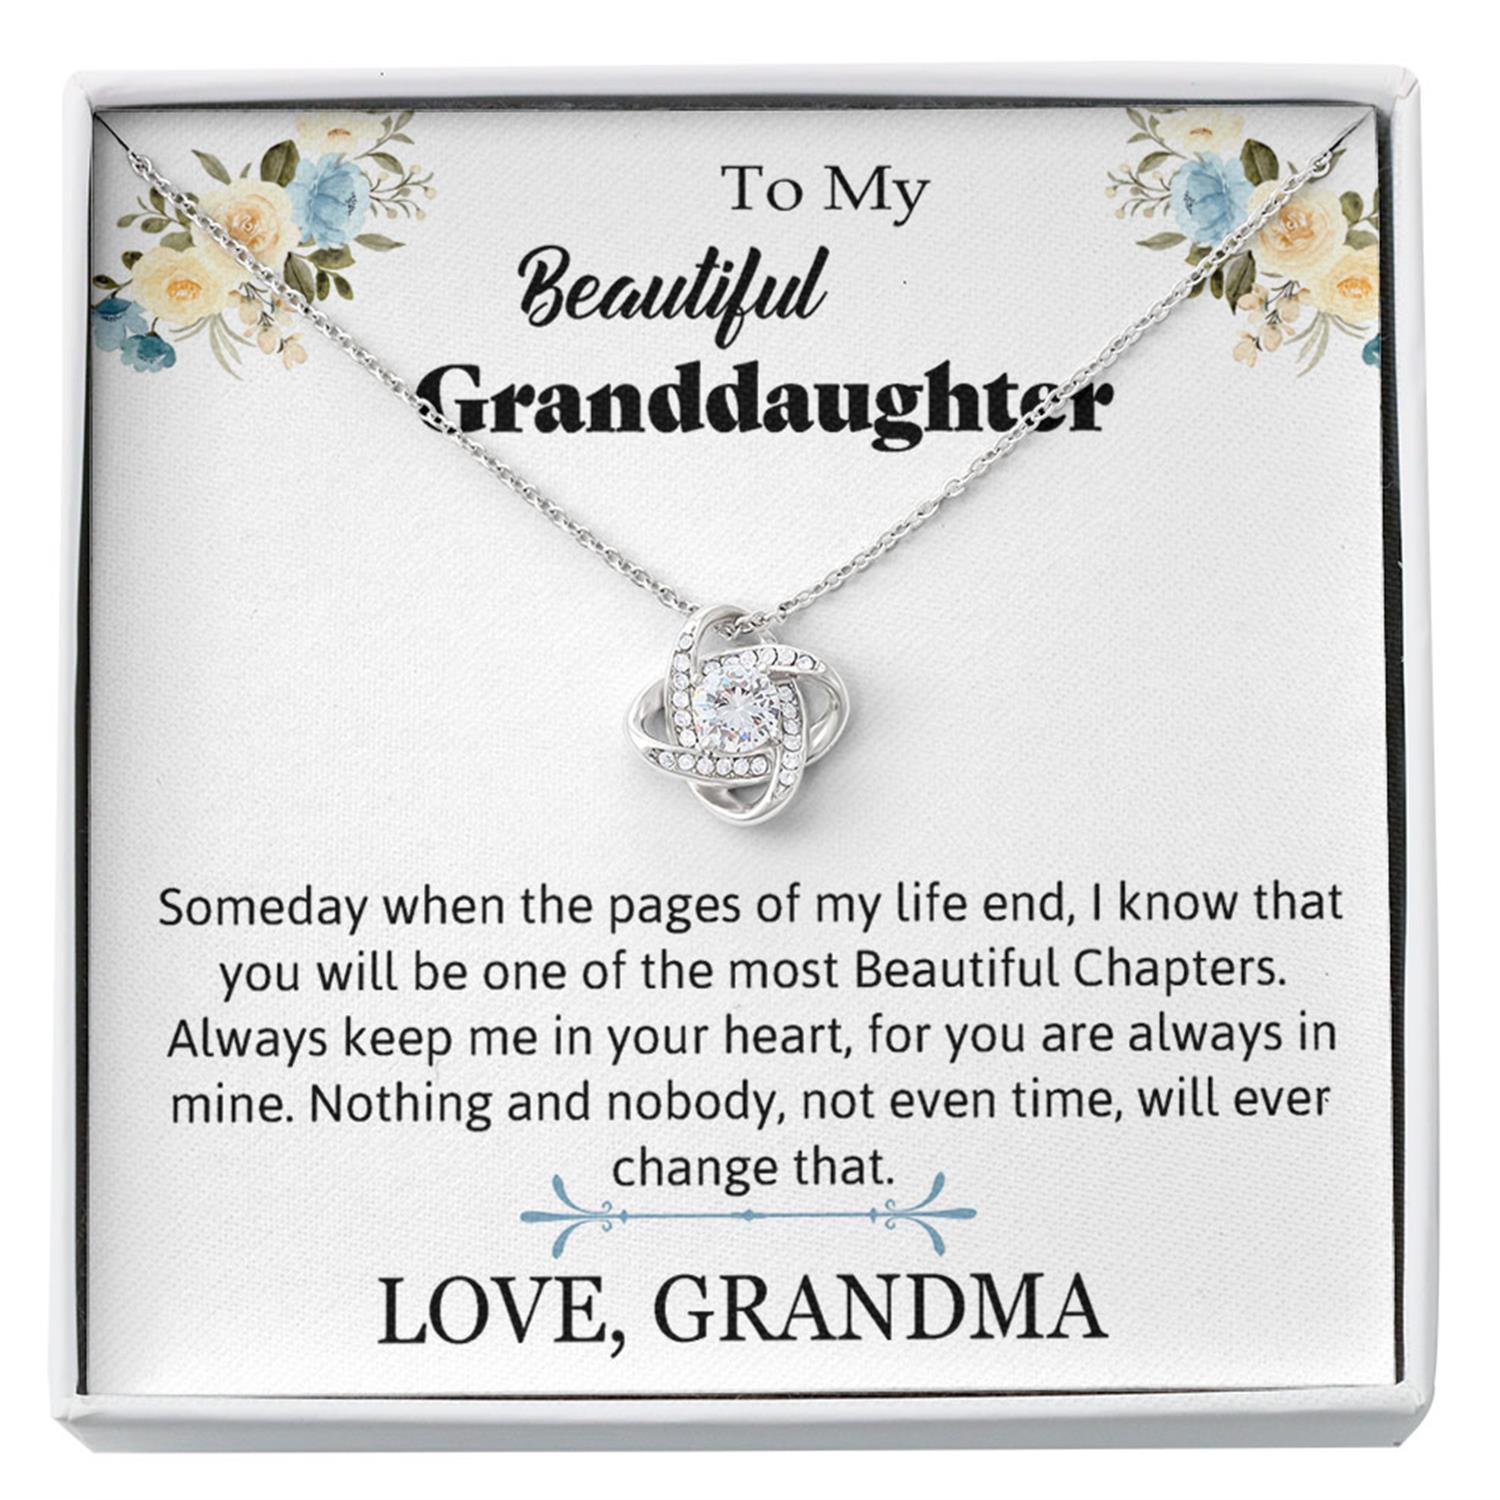 Granddaughter Necklace, To My Beautifull Granddaughter Necklace, Grandmother & Granddaughter Custom Necklace